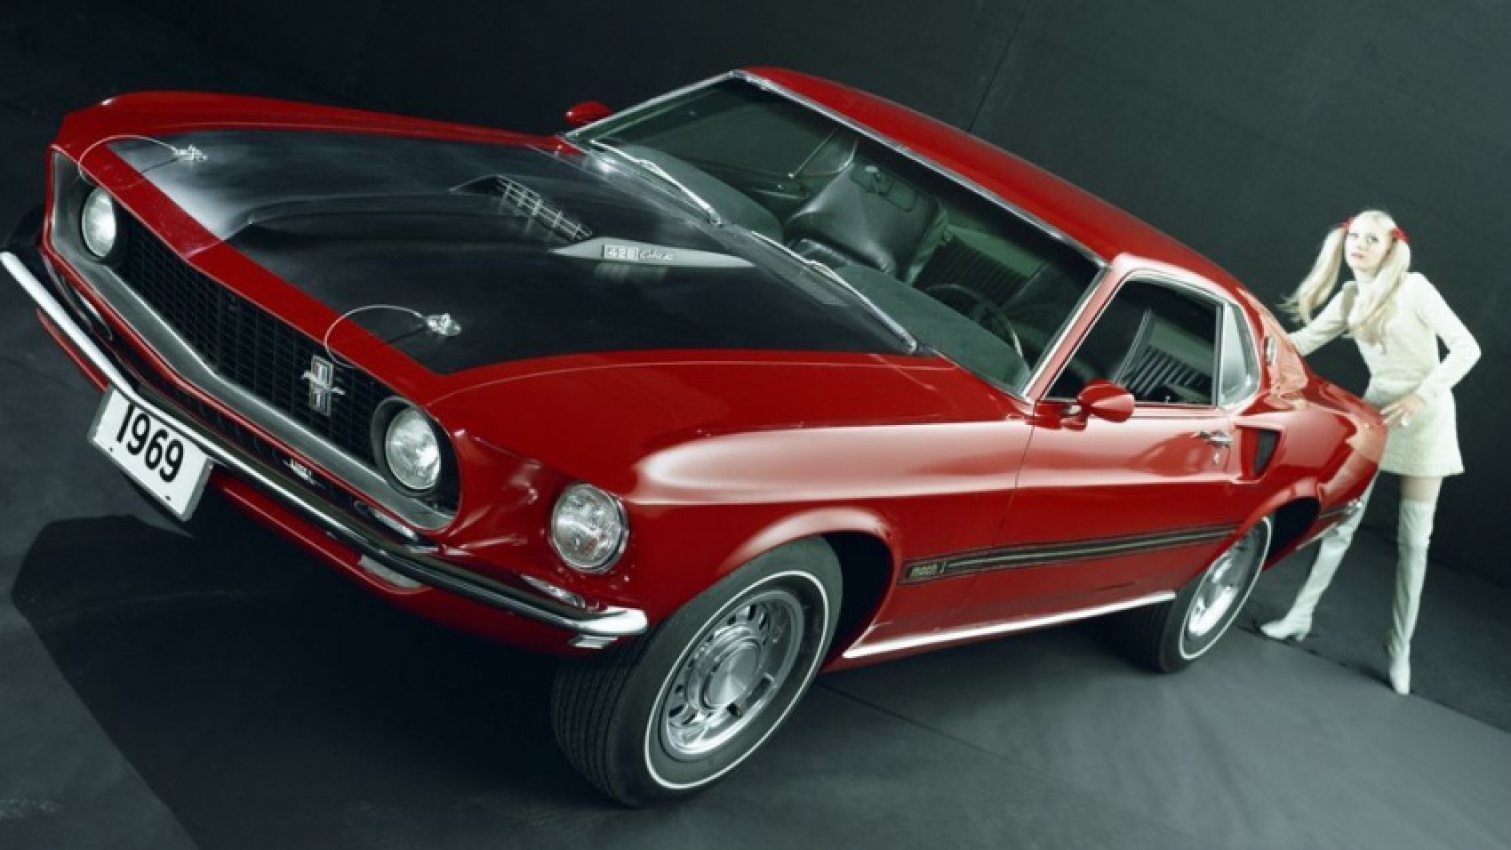 autos, cars, ford, auto news, coyote, mach 1, muscle car, mustang, pony car, v8, ford's legendary mustang mach 1 returns for 2021